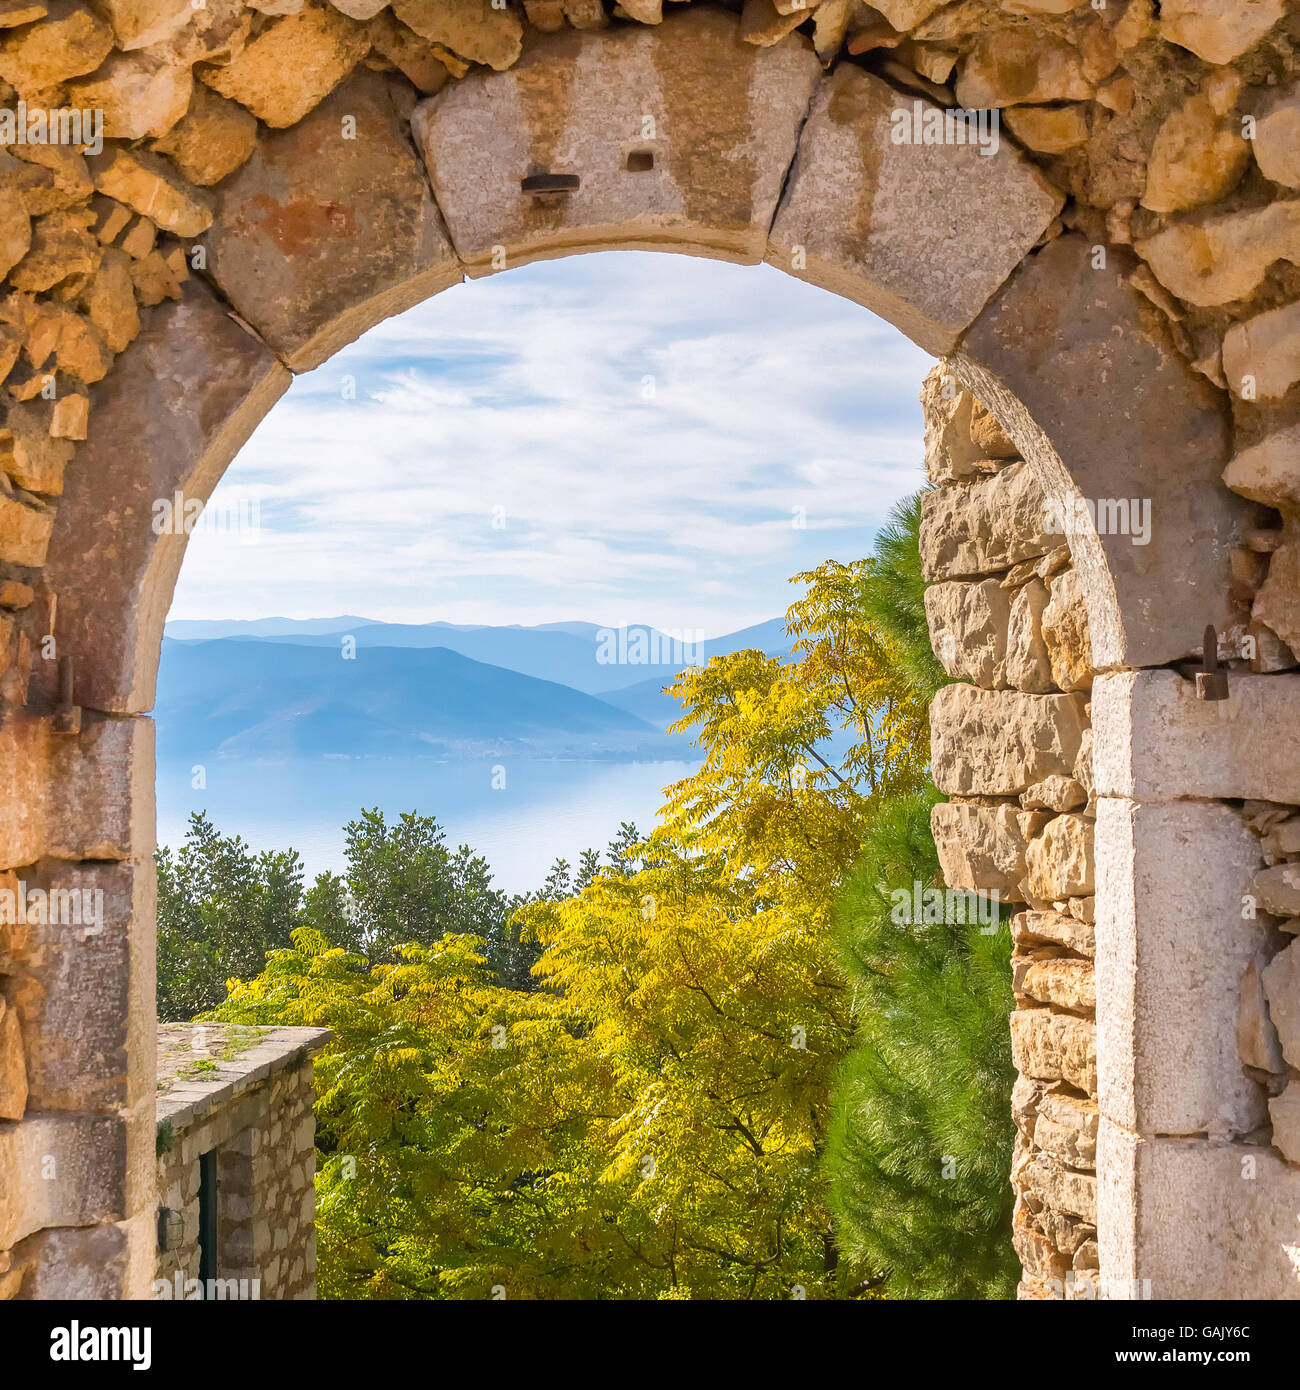 Beautiful landscape at Nafplio in Greece through the old arched stoney doorway of Palamidi castle. Stock Photo